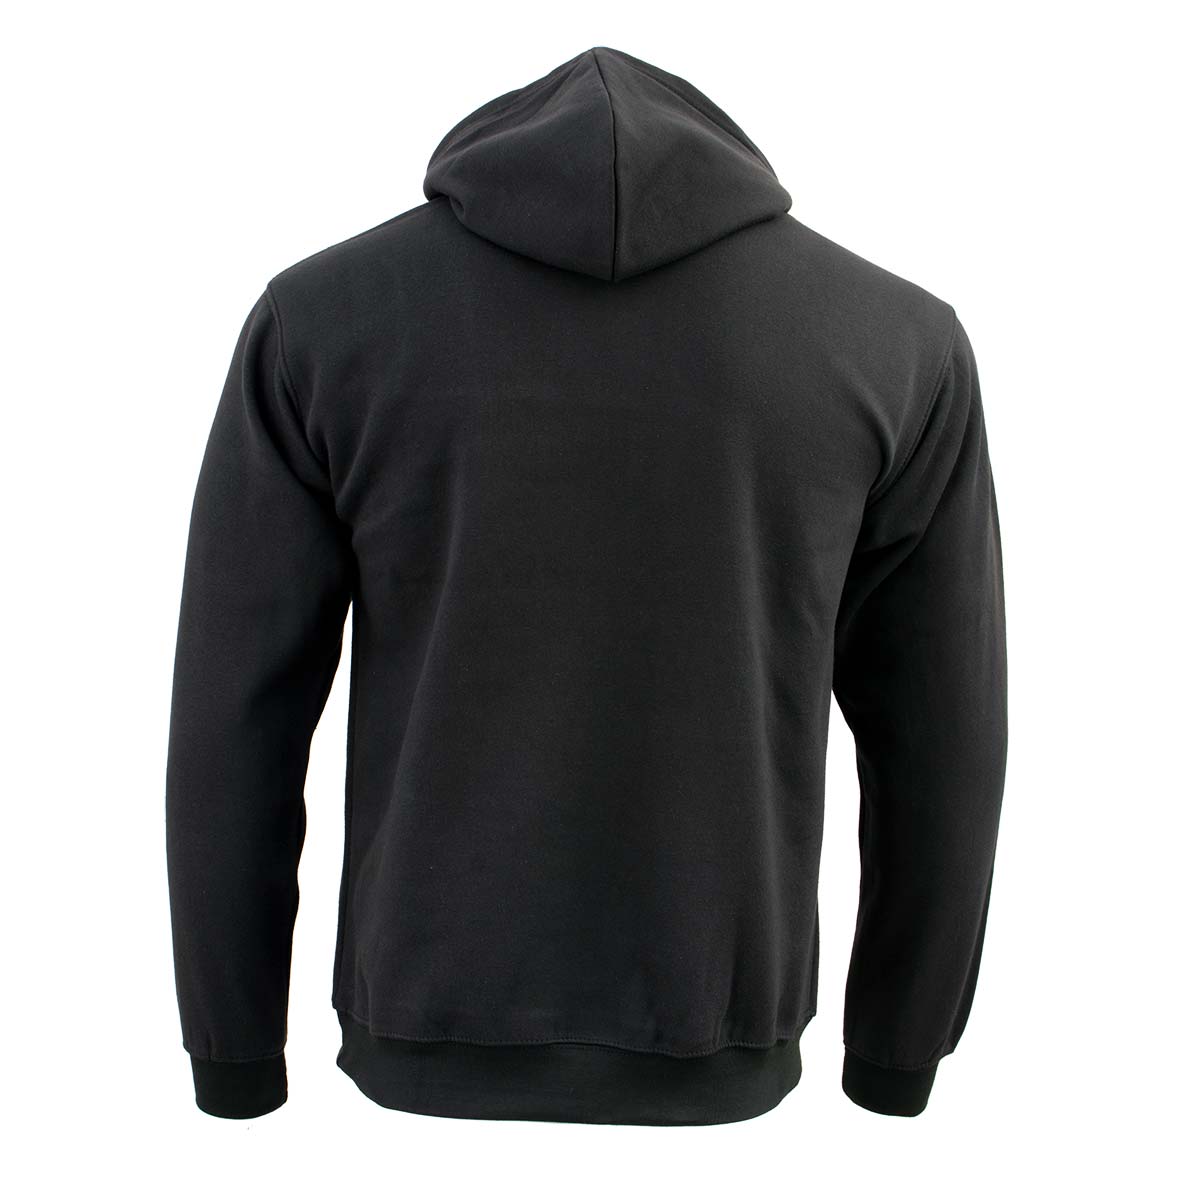 Biker Clothing Co. BCC118027 Men's Classic Black Pullover Hoodie Sweater